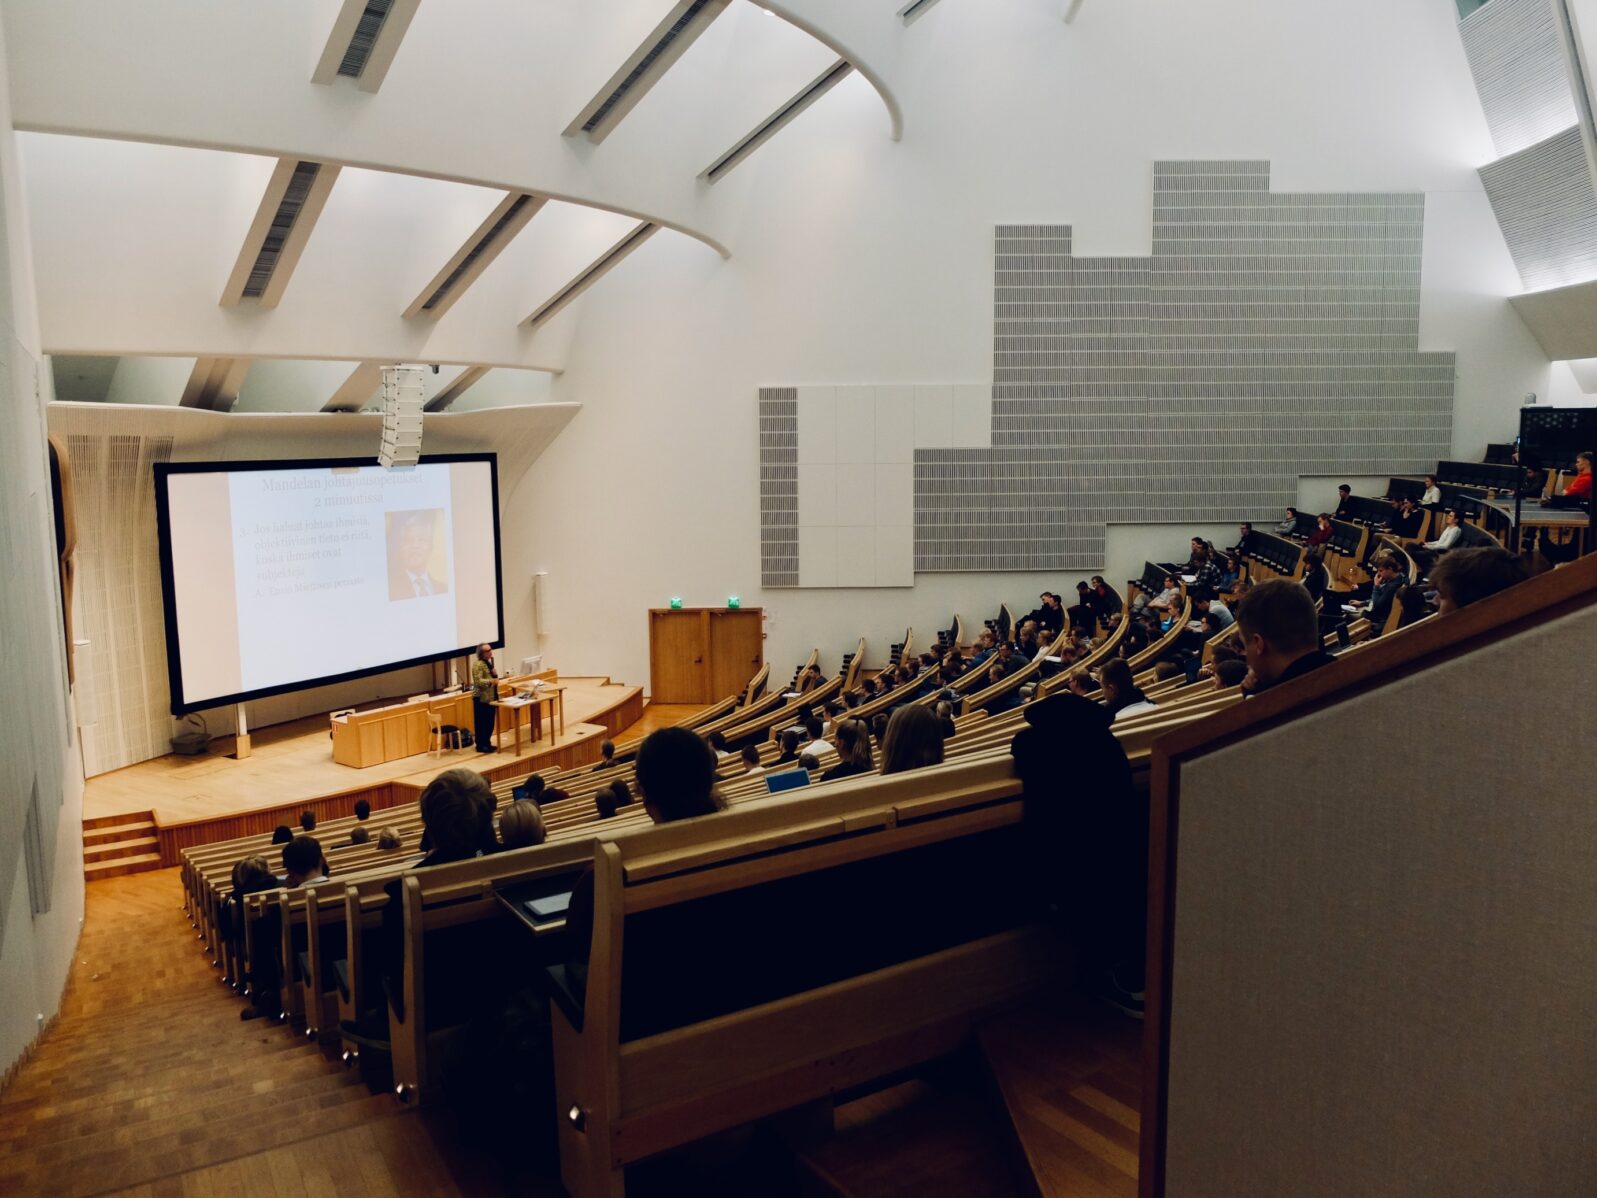 A university lecture hall. AAHMS has provided a submission to the Australian Universities Accord discussion paper consultation.